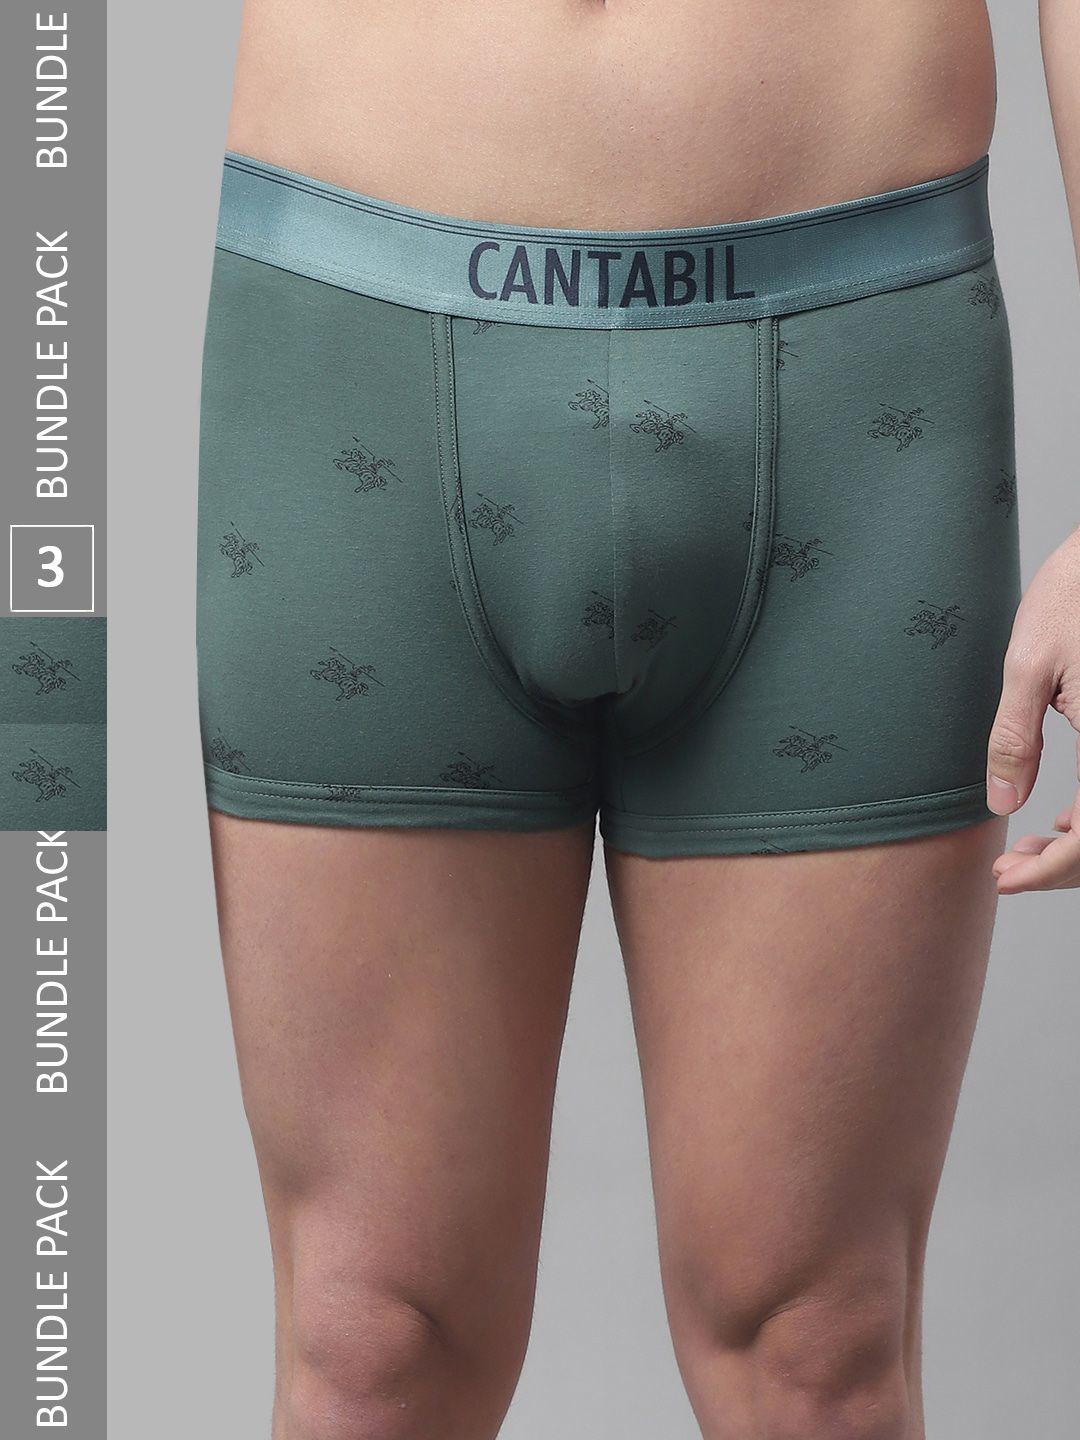 Cantabil Men Pack Of 3 Printed Cotton Boxer Style Briefs